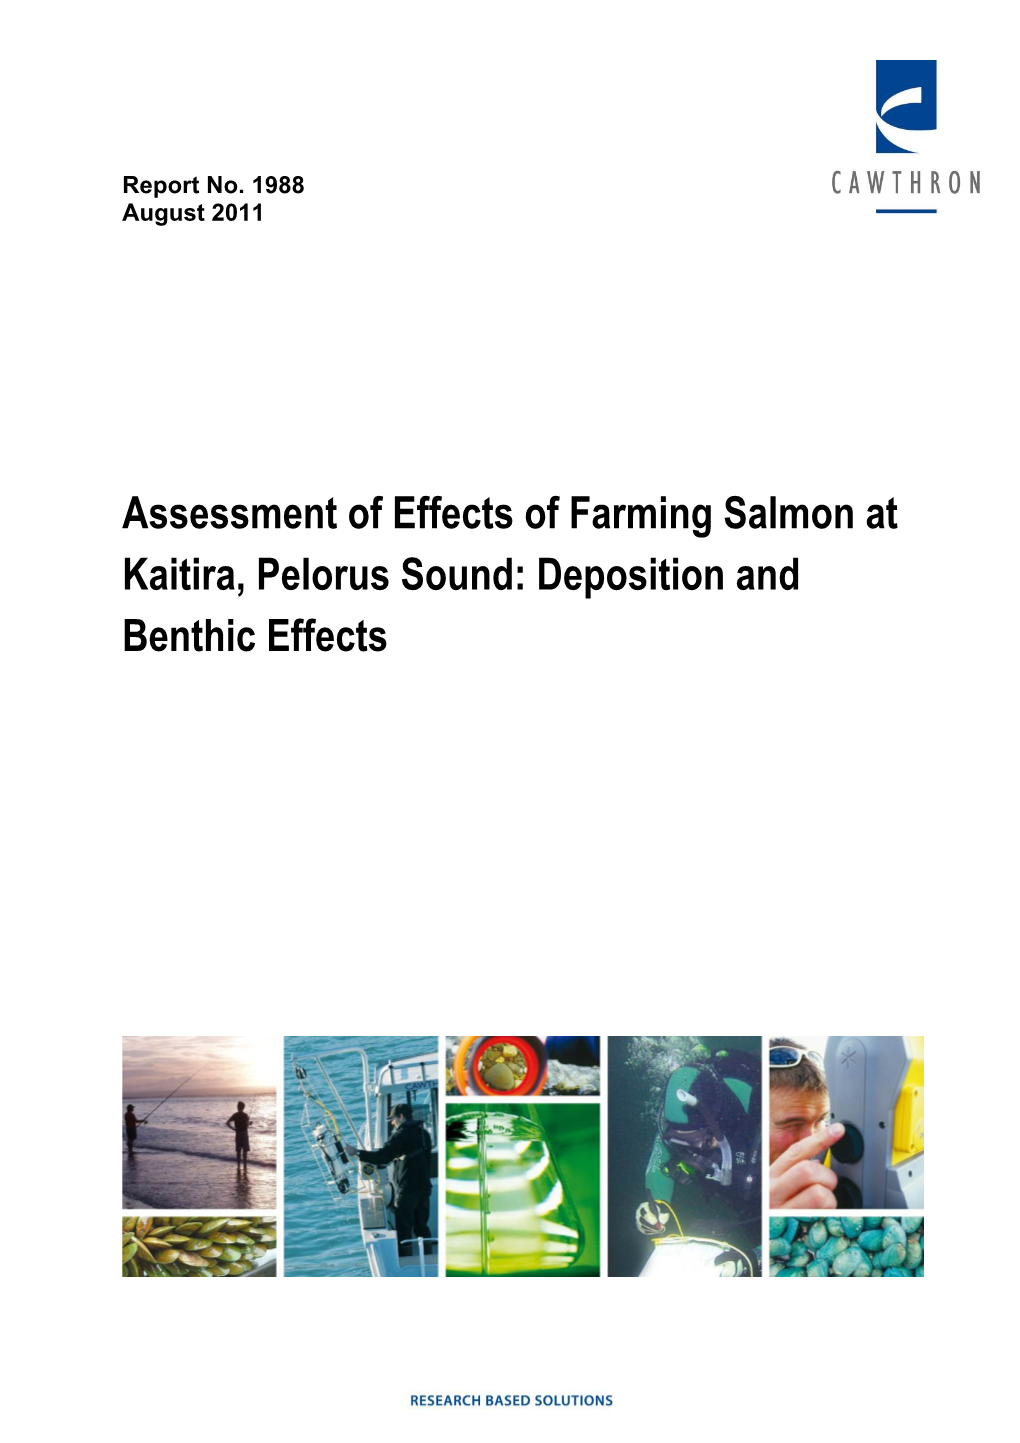 Assessment of Effects of Farming Salmon at Kaitira, Pelorus Sound: Deposition and Benthic Effects